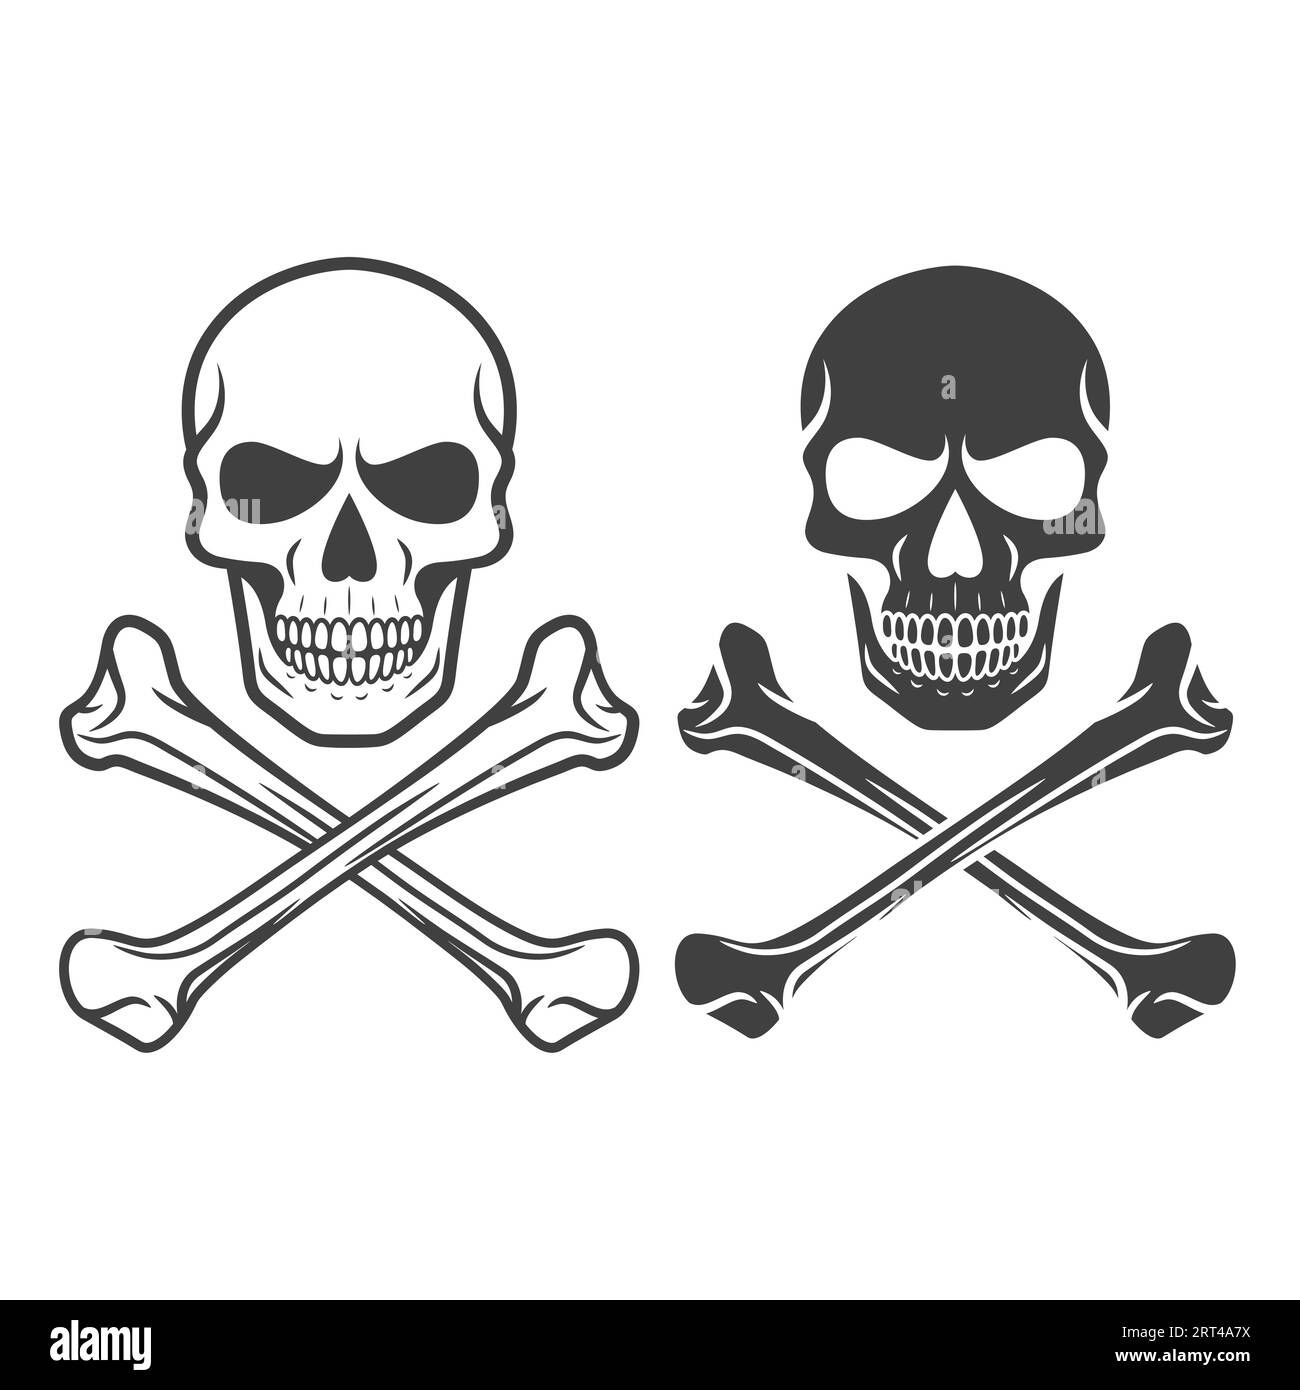 https://c8.alamy.com/comp/2RT4A7X/vector-black-and-white-skull-and-crossbones-icon-set-isolated-skulls-collection-with-outline-cut-out-style-in-front-view-hand-drawn-skull-head-2RT4A7X.jpg